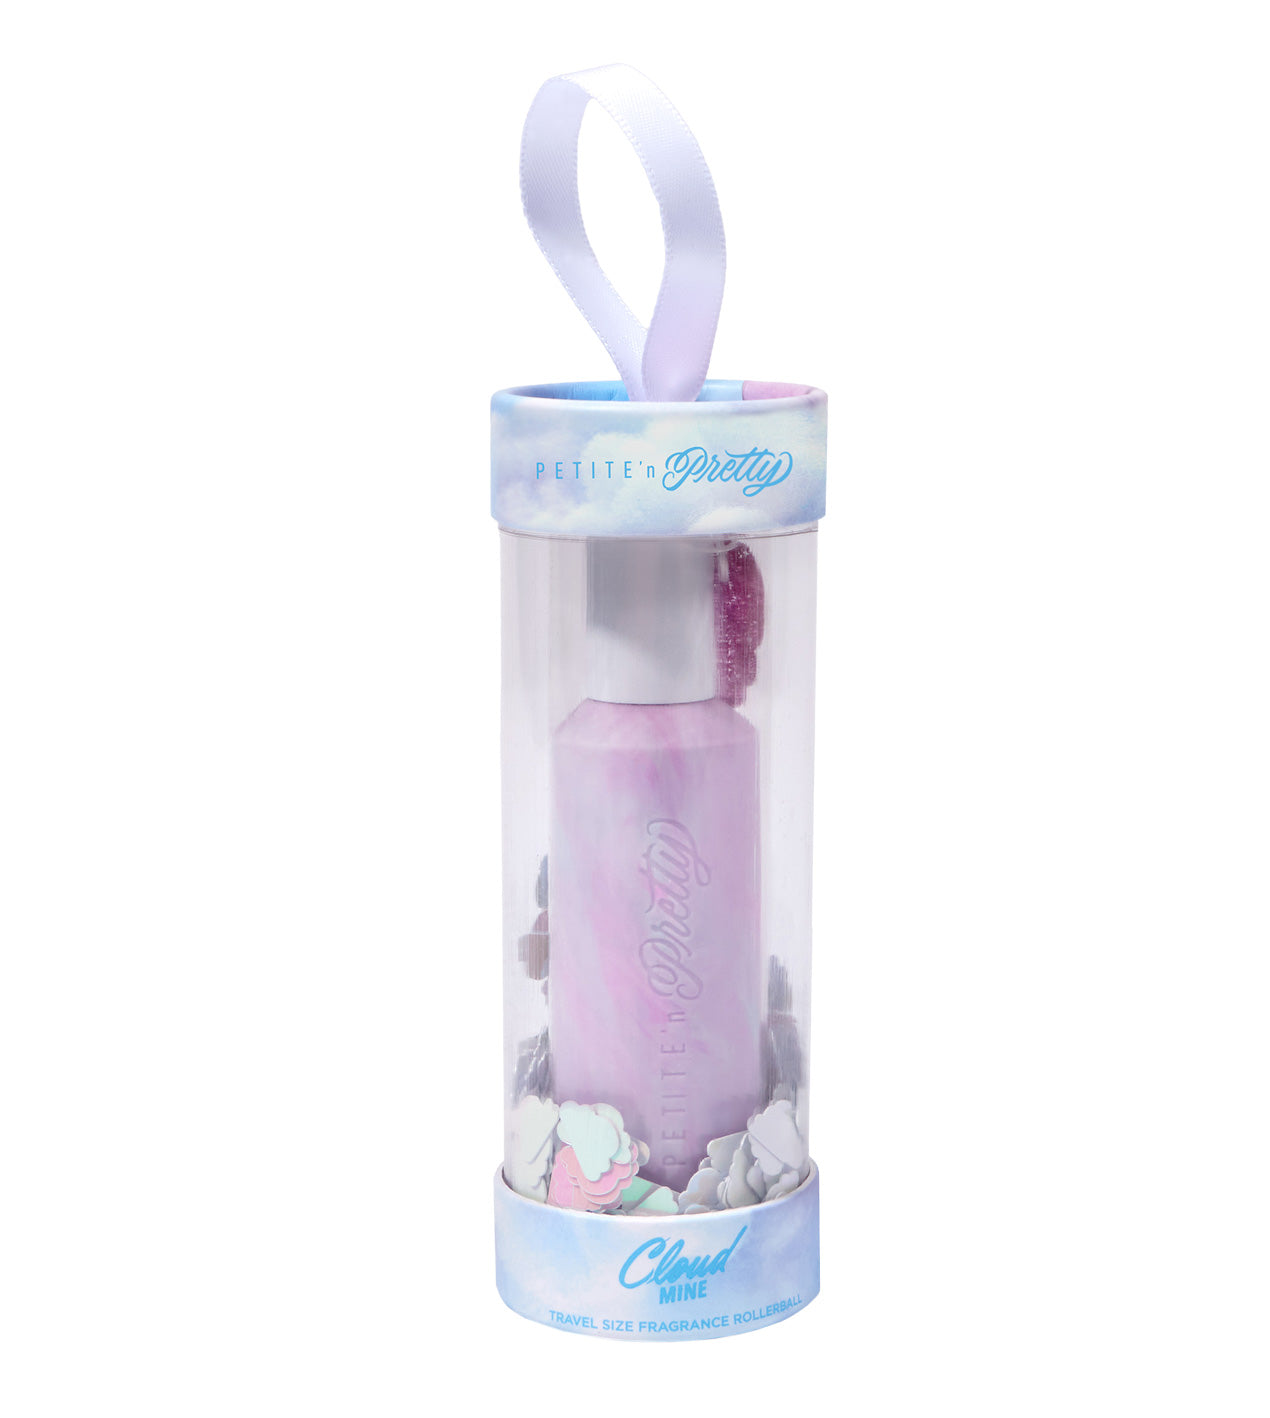 Deluxe 9021-GLOW! Fresh Start Cleanser - Petite 'n Pretty - A beauty brand  leading the Sparkle Revolution!